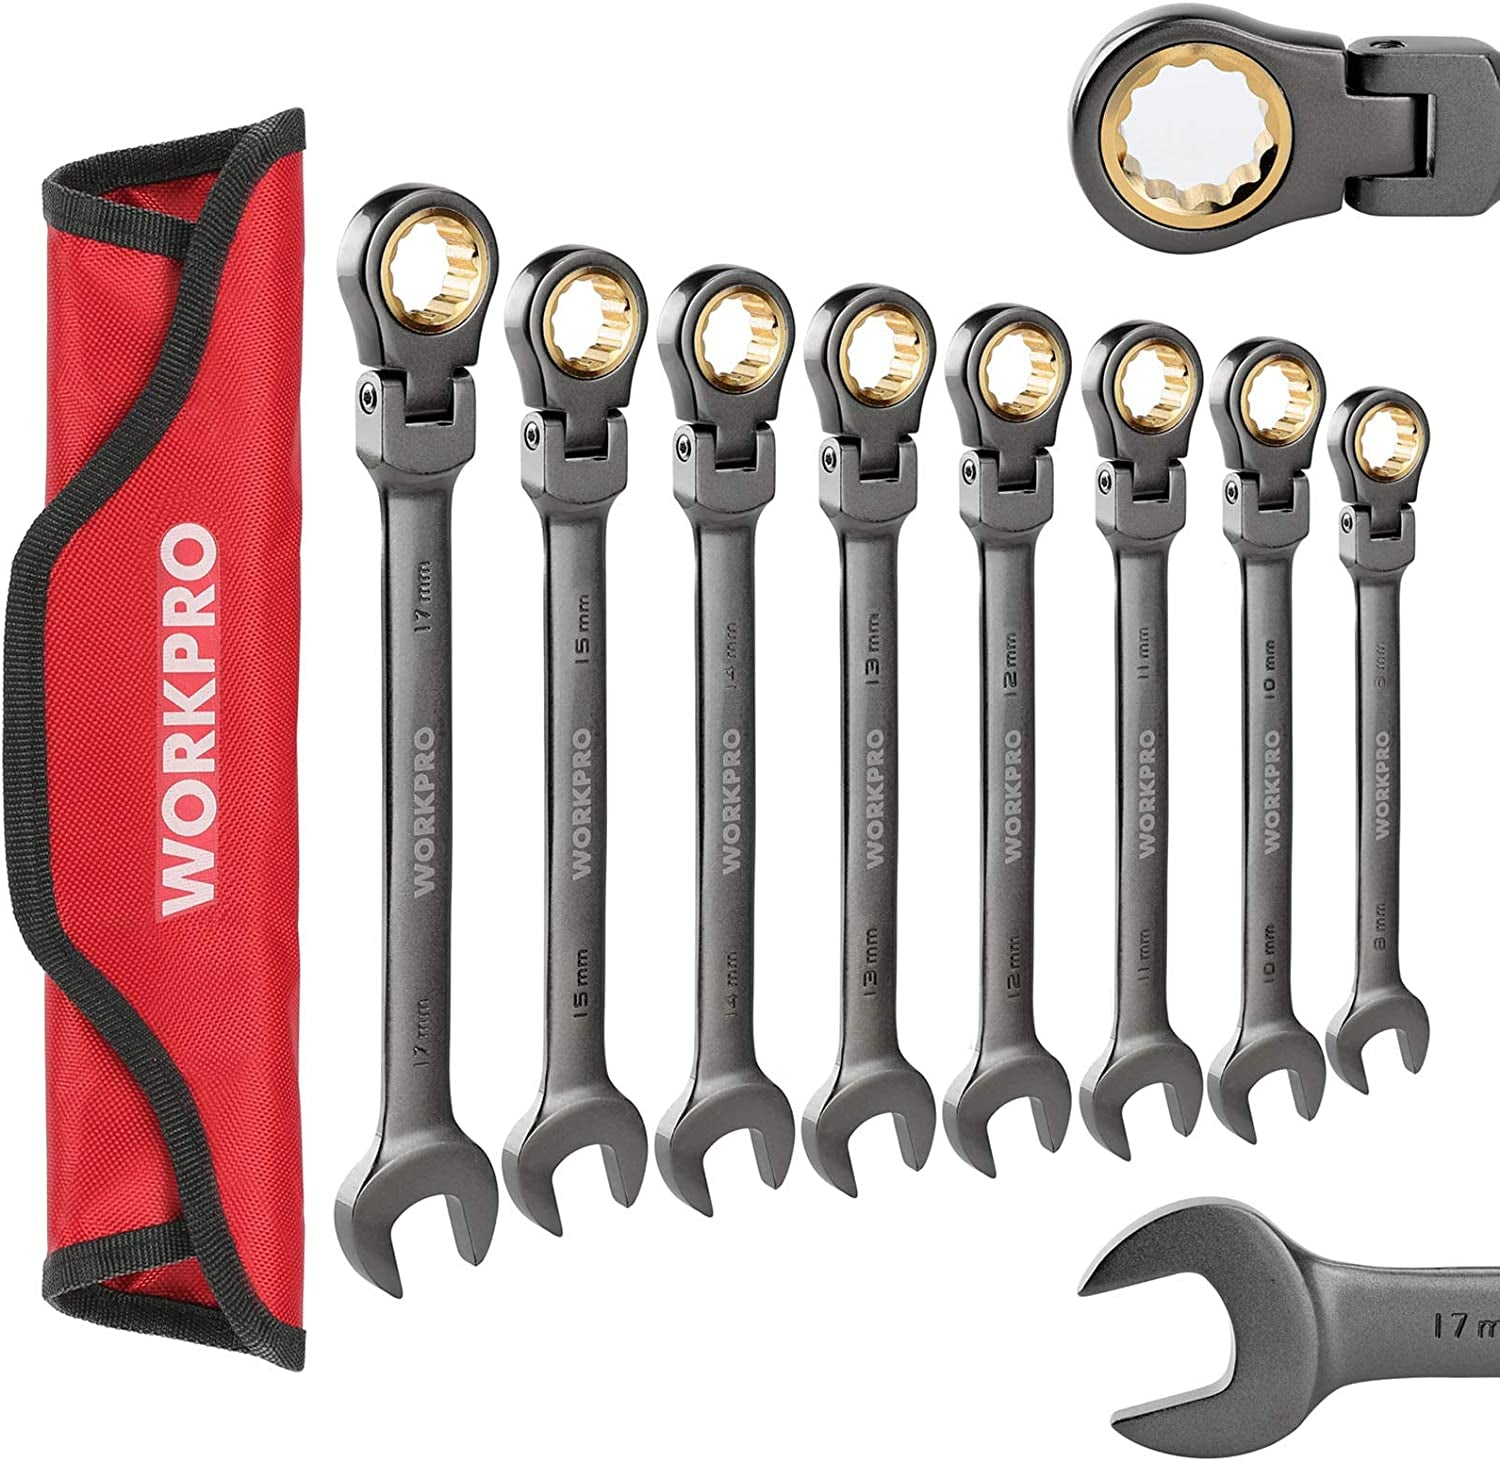 8-Piece Flex-Head Ratcheting Combination Wrench Set, Metric 9-17 Mm, 72-Teeth, Cr-V Constructed, Nickel Plating with Organization Bag